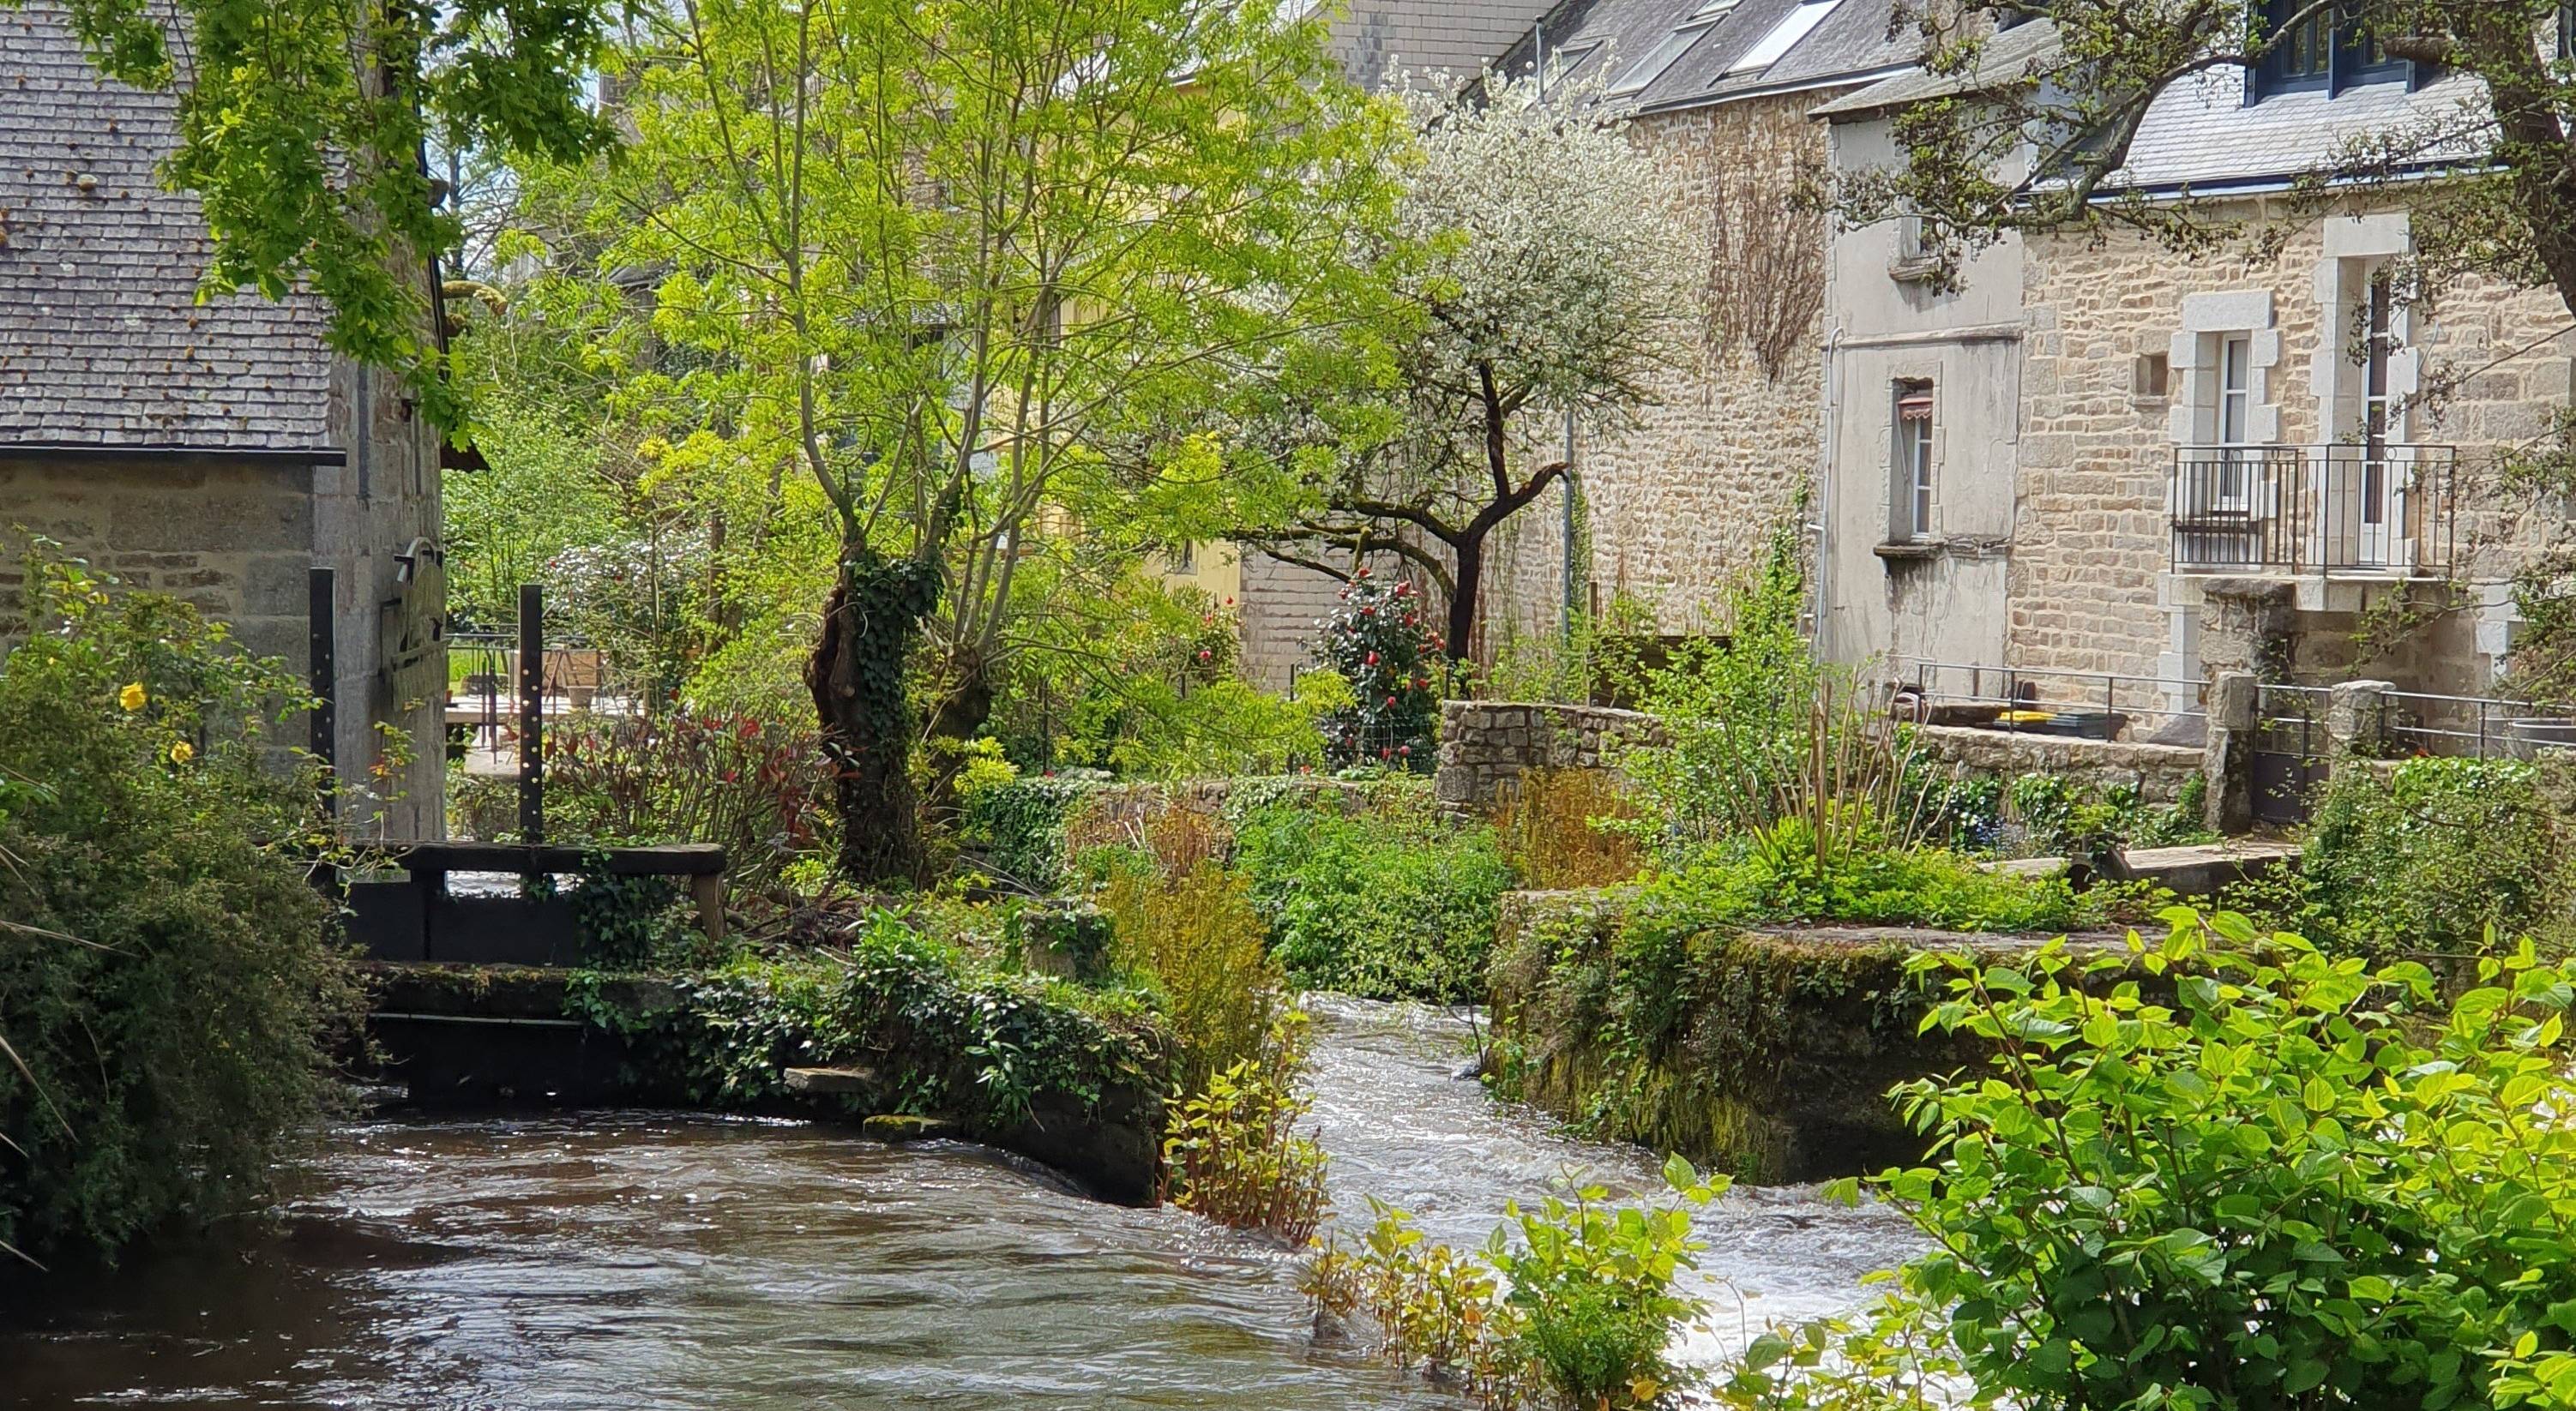 Tag 1: "Ein Sommer in Pont-Aven"